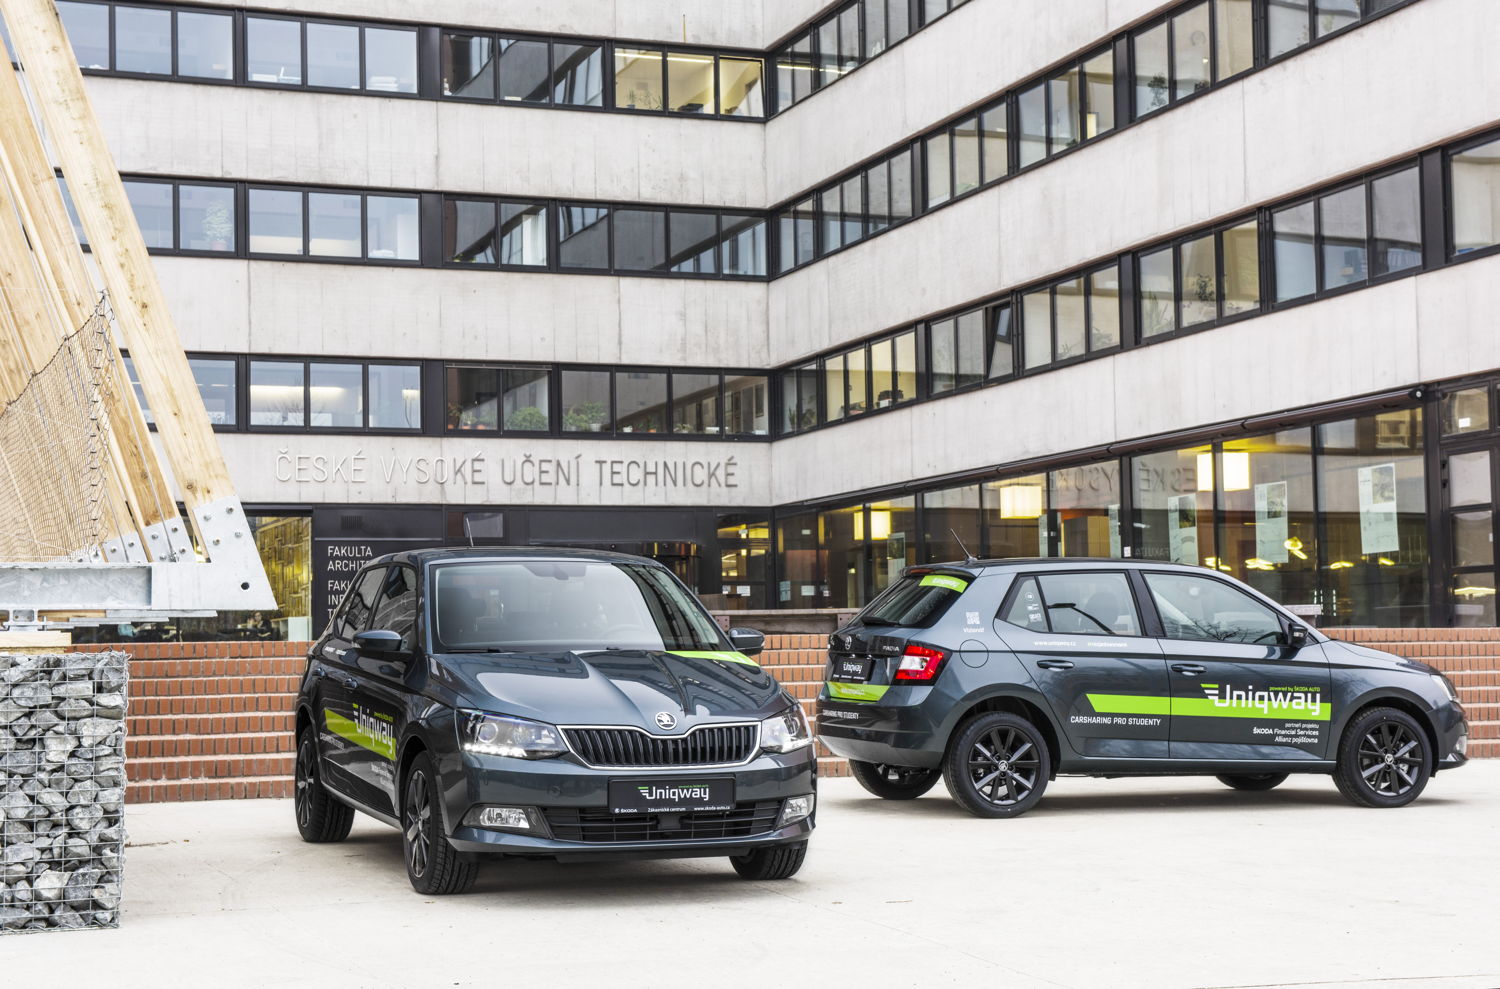 During the pilot phase, the students in Prague can rent one of 15 ŠKODA FABIA STYLE cars from now on.  
    
